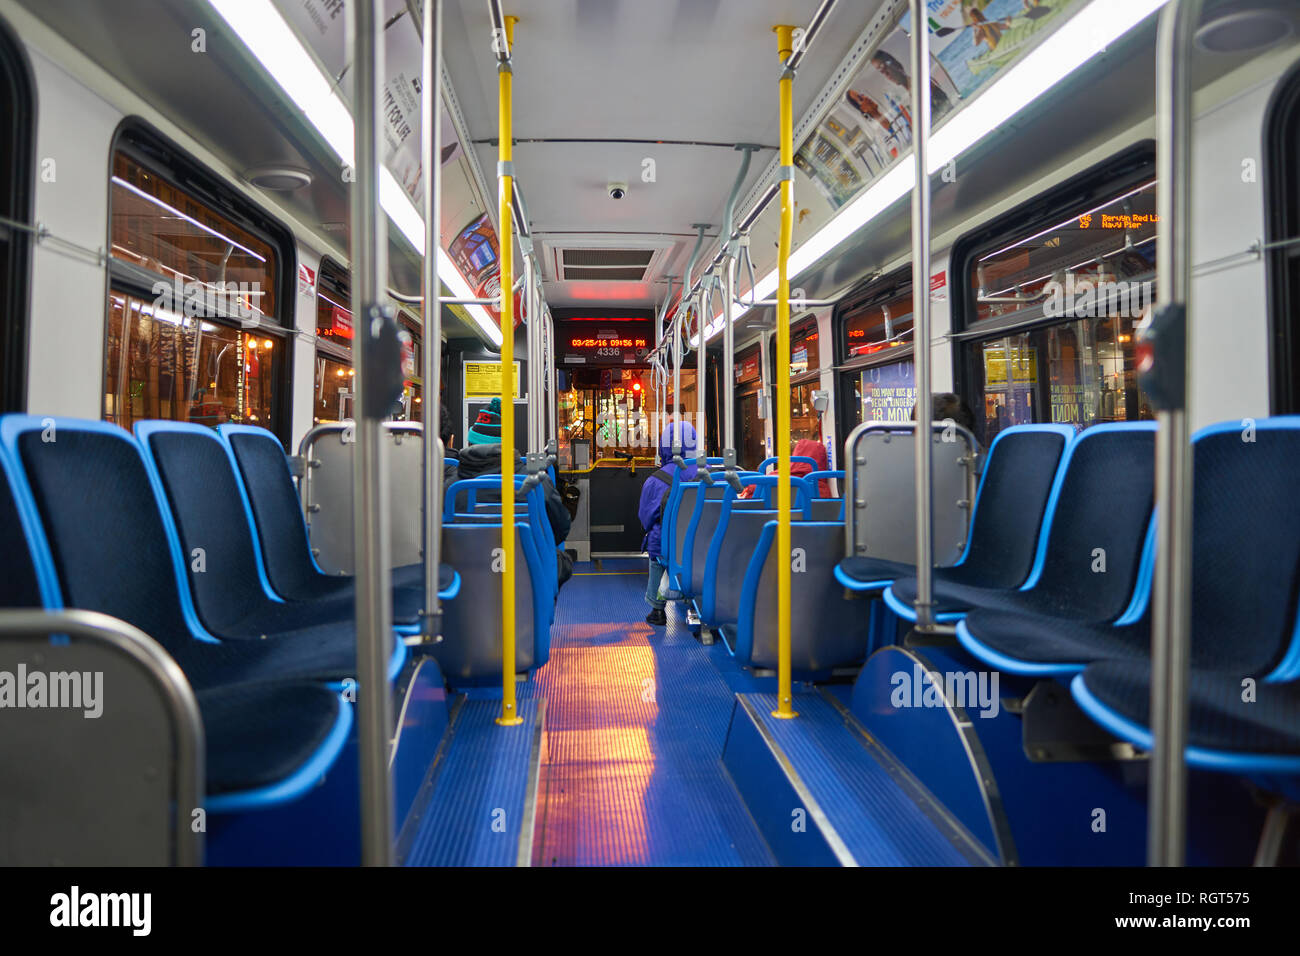 CHICAGO, IL - CIRCA MARCH, 2016: inside a bus in Chicago. Chicago is the third most populous city in the United States. Stock Photo